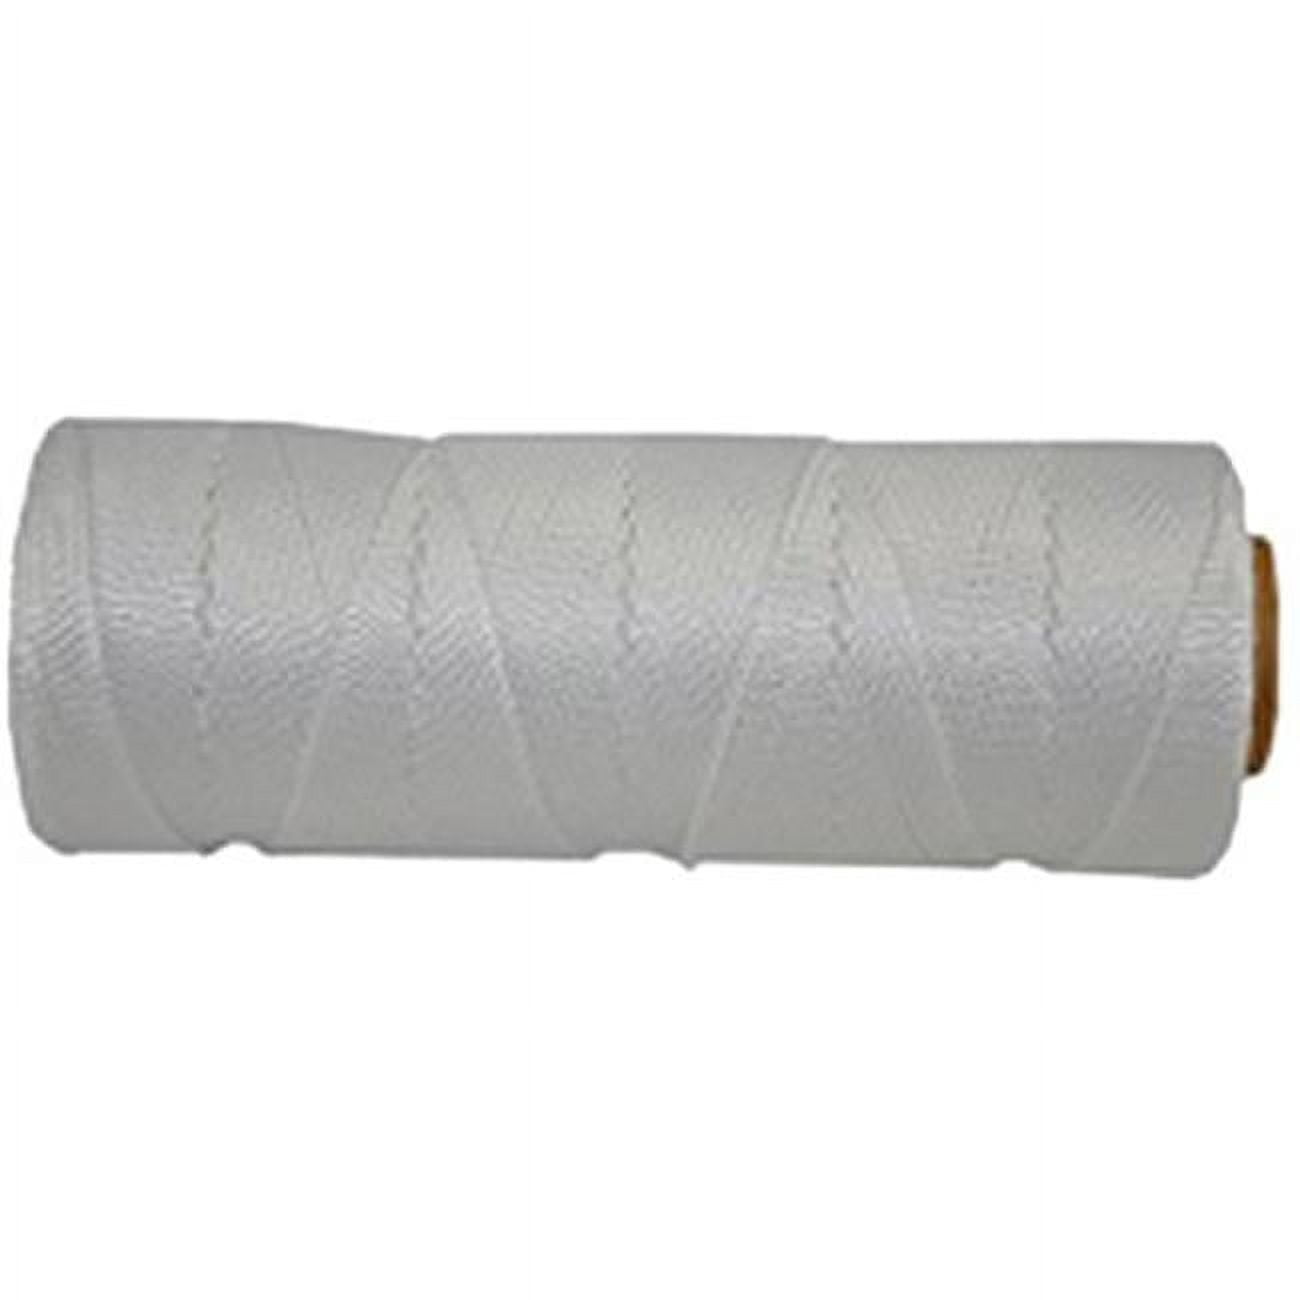 Picture of MJJ TL502 8 oz No.18 x 525 ft. Nylon Twisted Twine - Gold